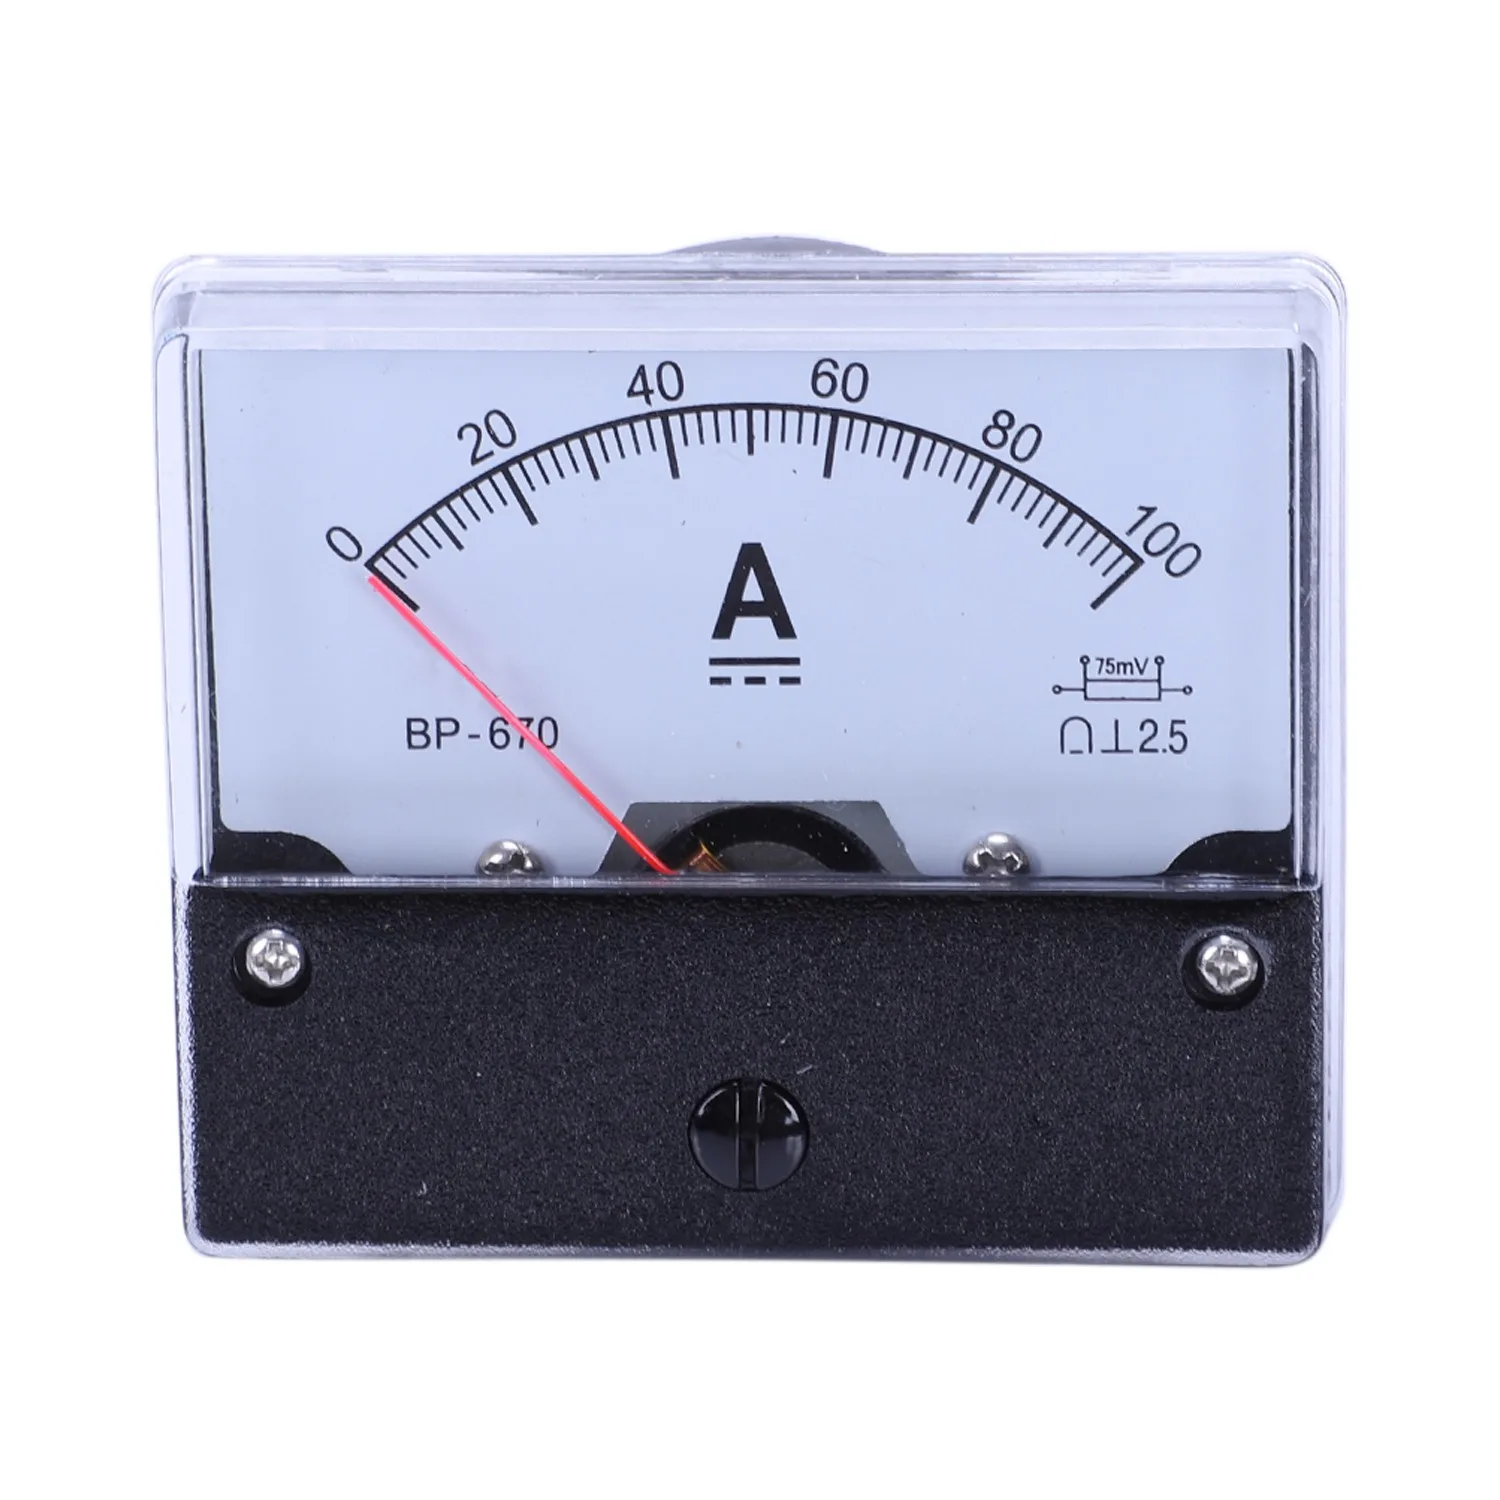 

DC 100A Analog Panel Ampere Current Counter Ammeter Meter DH-670